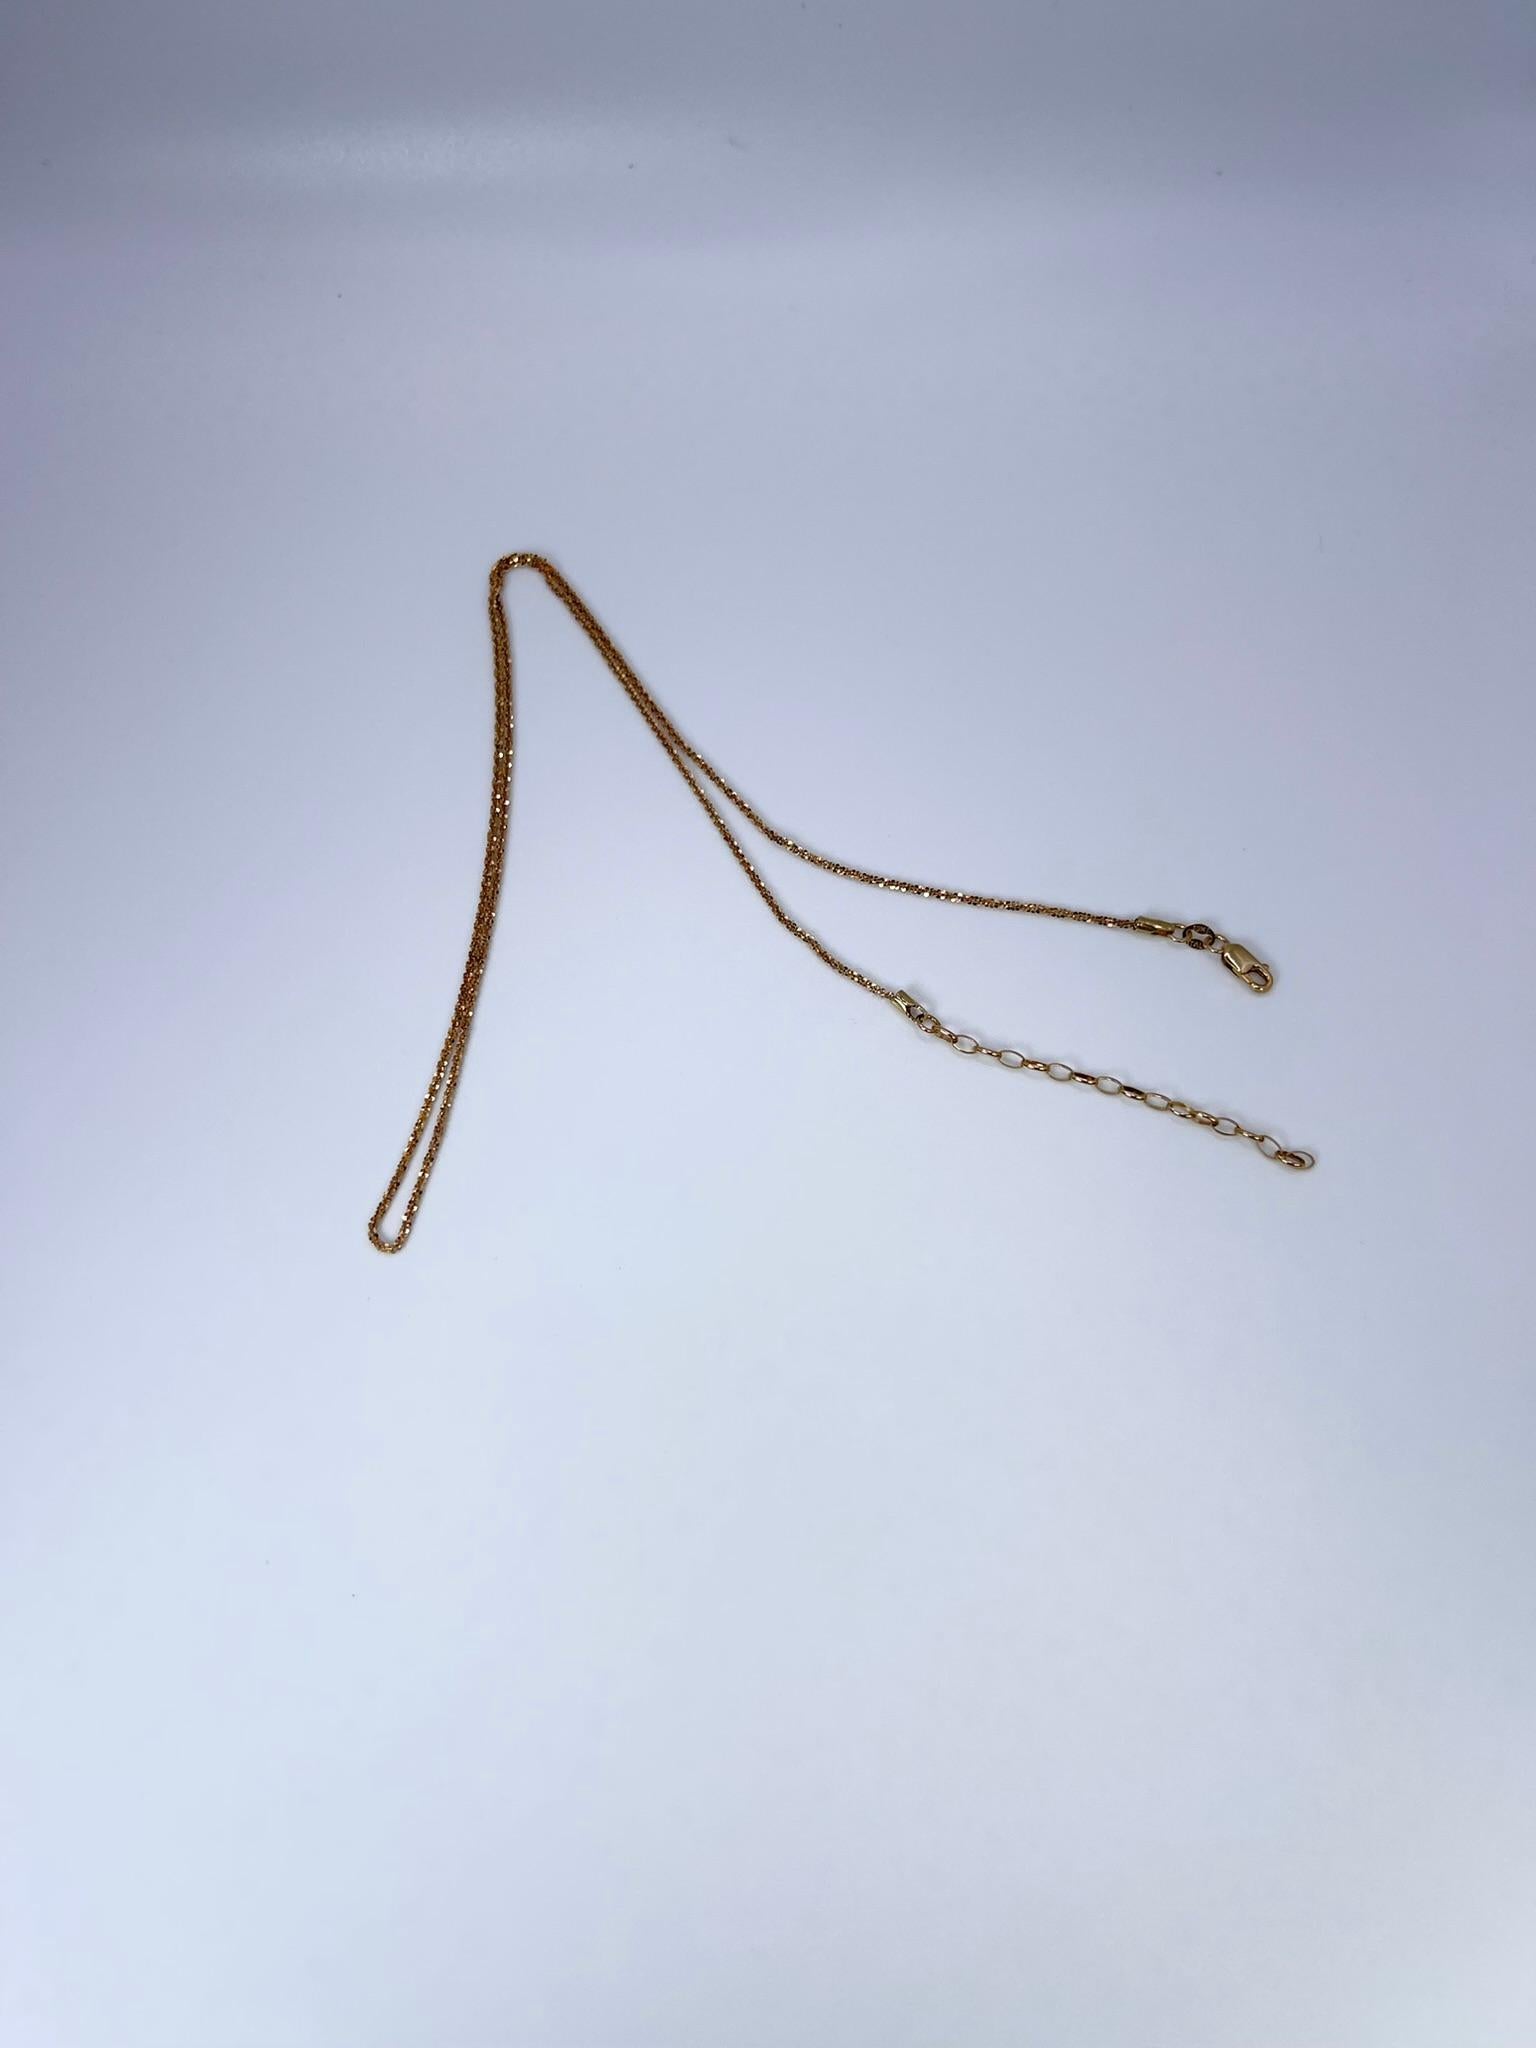 Rare fancy chain, plain solid gold. The chain sparkles on its own and is known as diamond cut chain.

GRAM WEIGHT: 2.10gr
GOLD: 10KT yellow gold
CLOSURE: Lobster
WIDTH: 1.1MM
LENGTH: 18